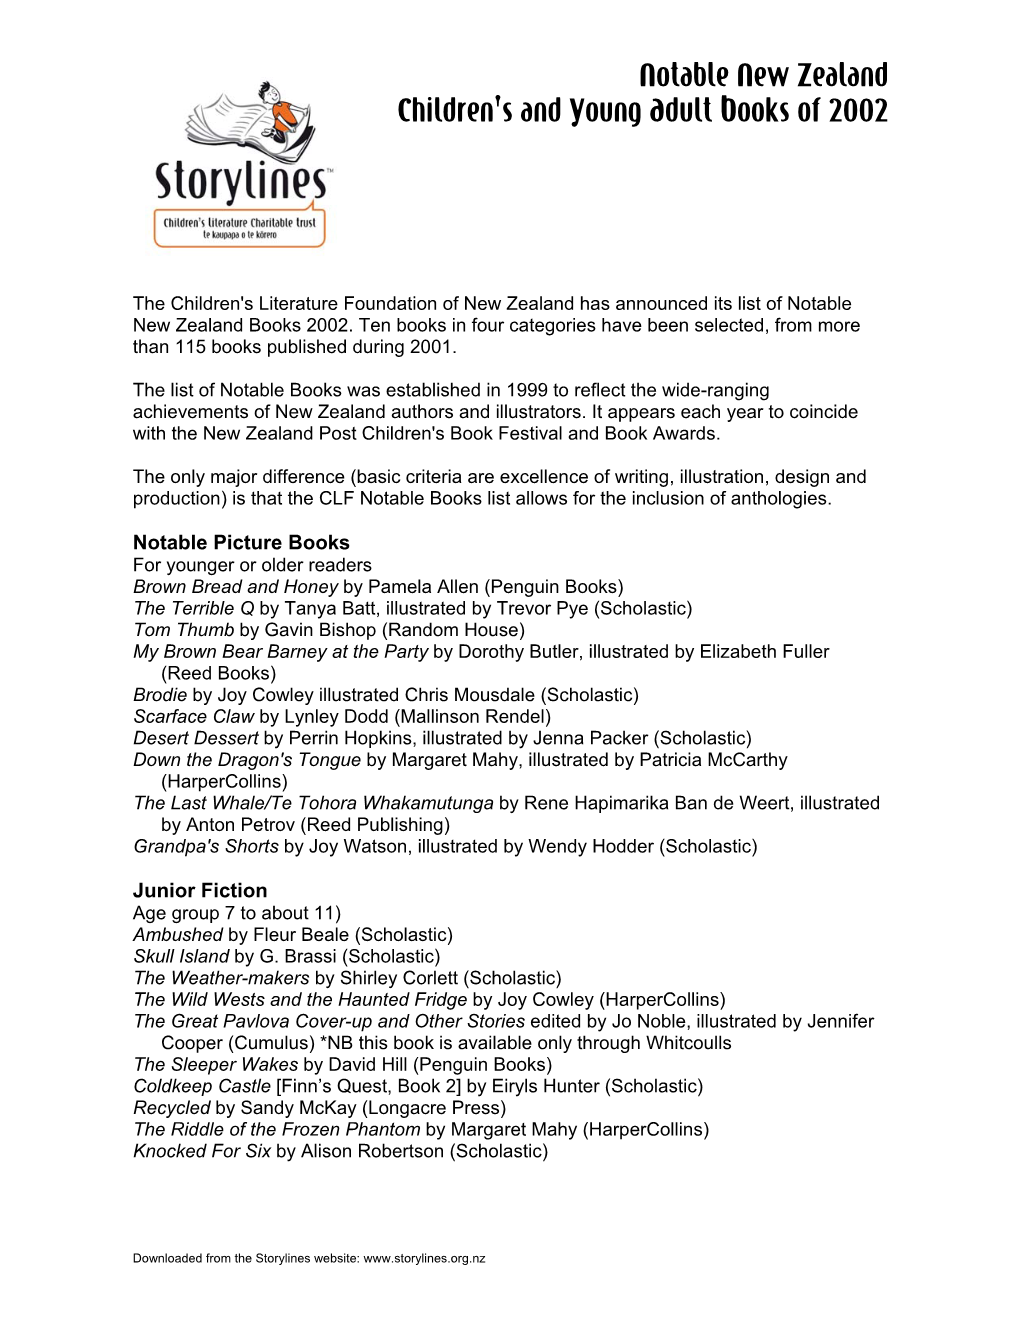 Storylines Notable Books List 2002